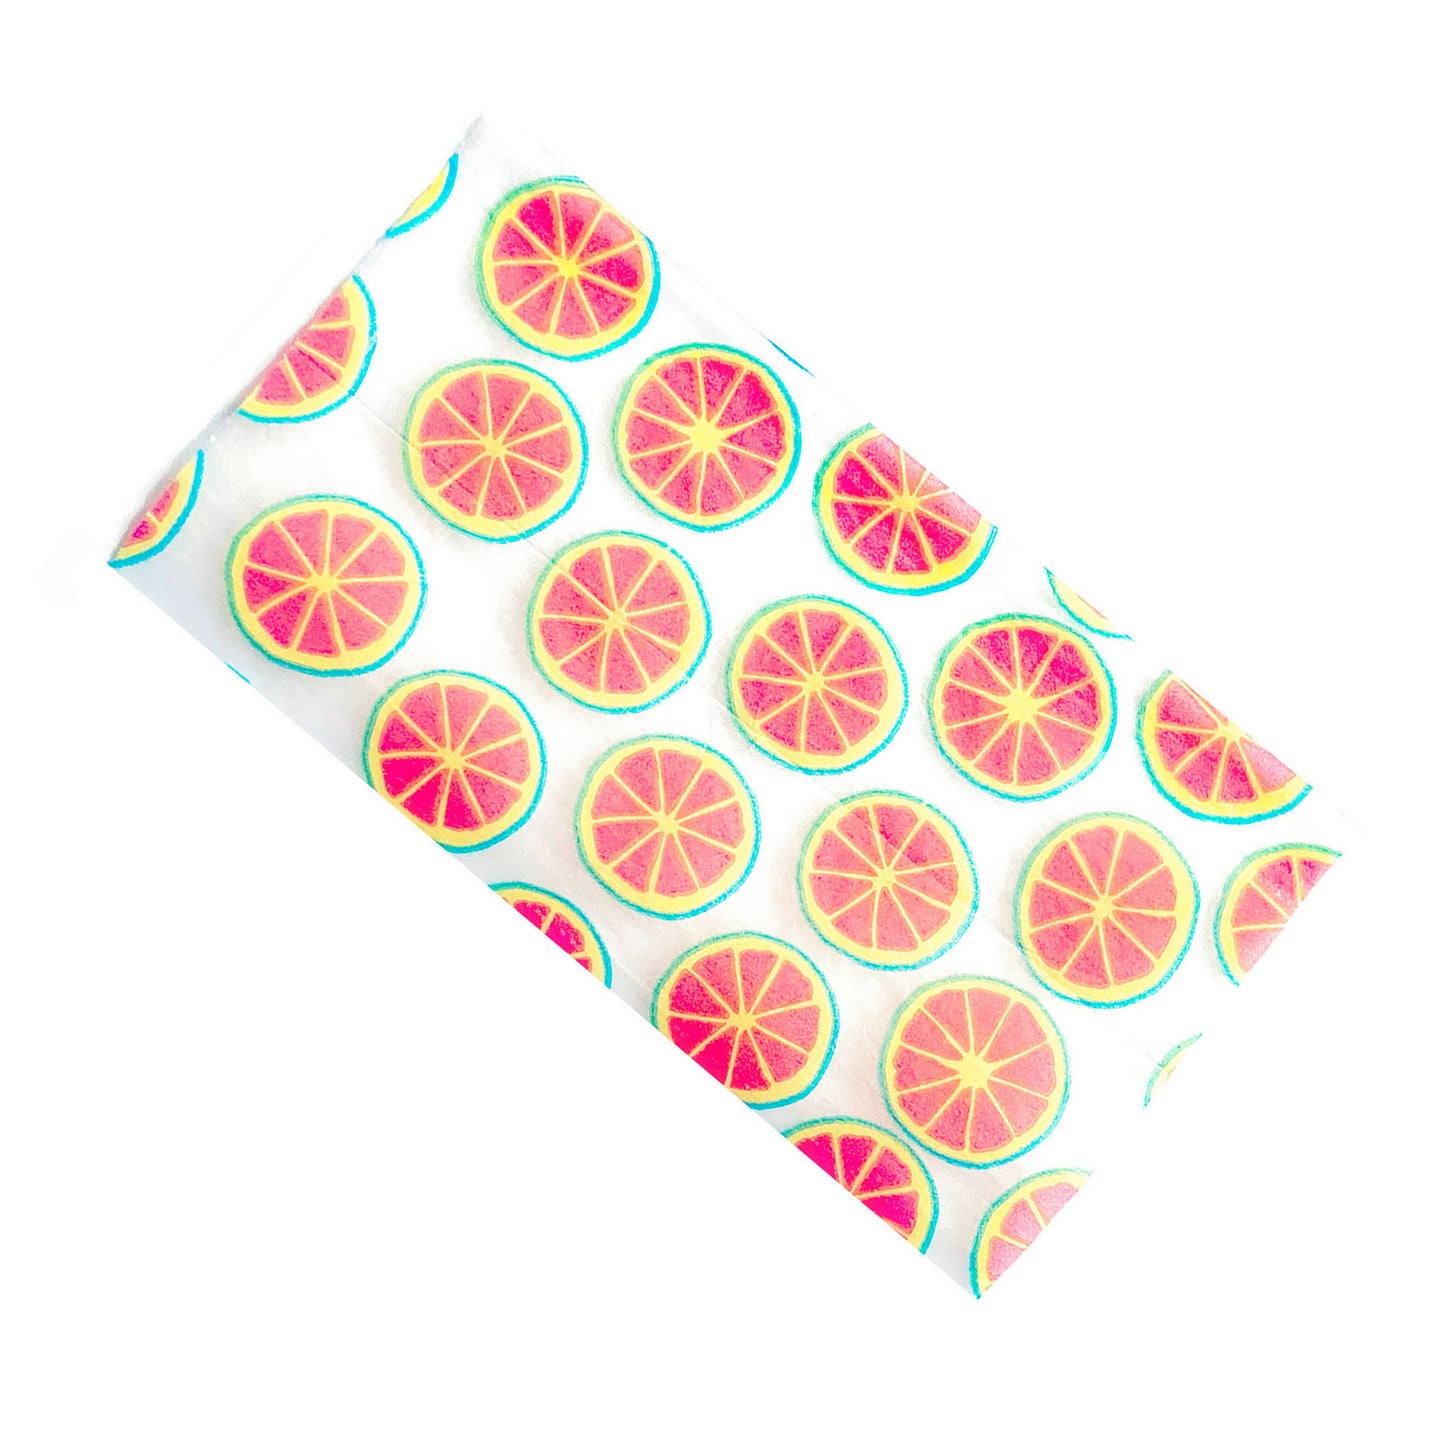 The Citrus Papers, set of 10: Grapefruit fruit printed rolling papers. These designer rolling papers are girly, pretty, vegan, cute, cool, standard size, high quality, even burn, natural dyes, best tasting, slow burn.